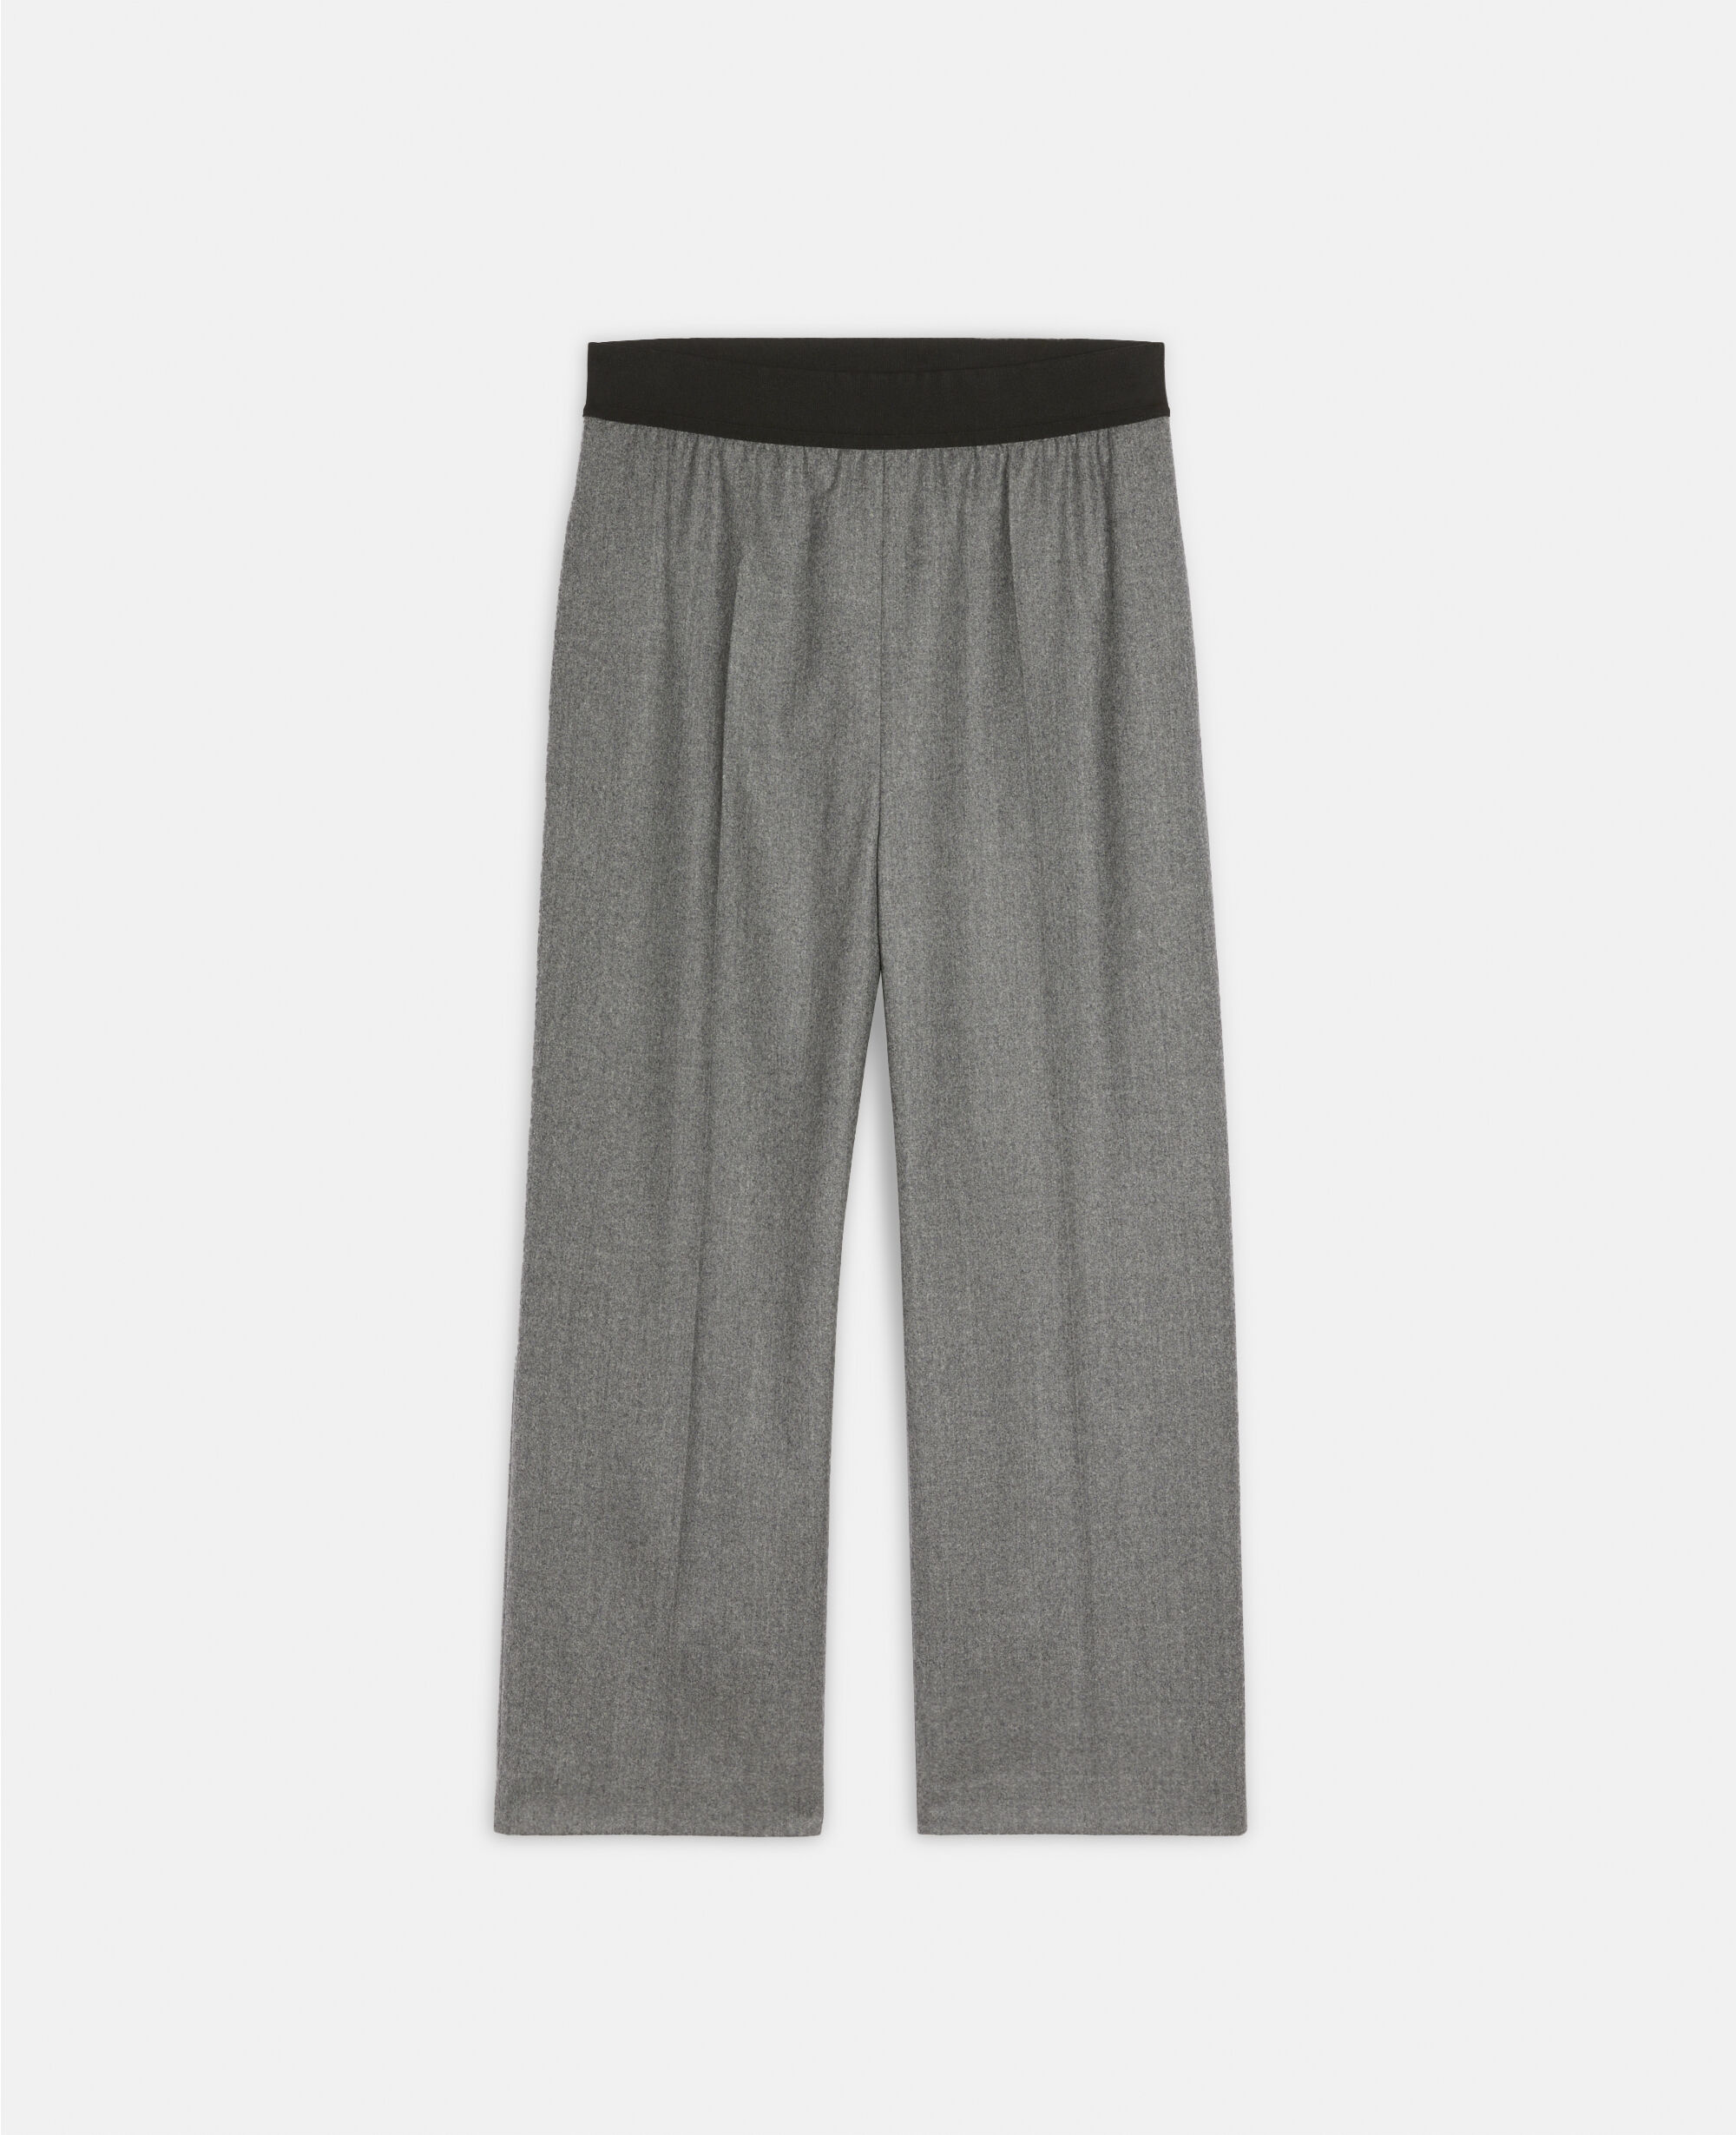 Gerry Weber Edition Flannel pants  gray 200190  48R